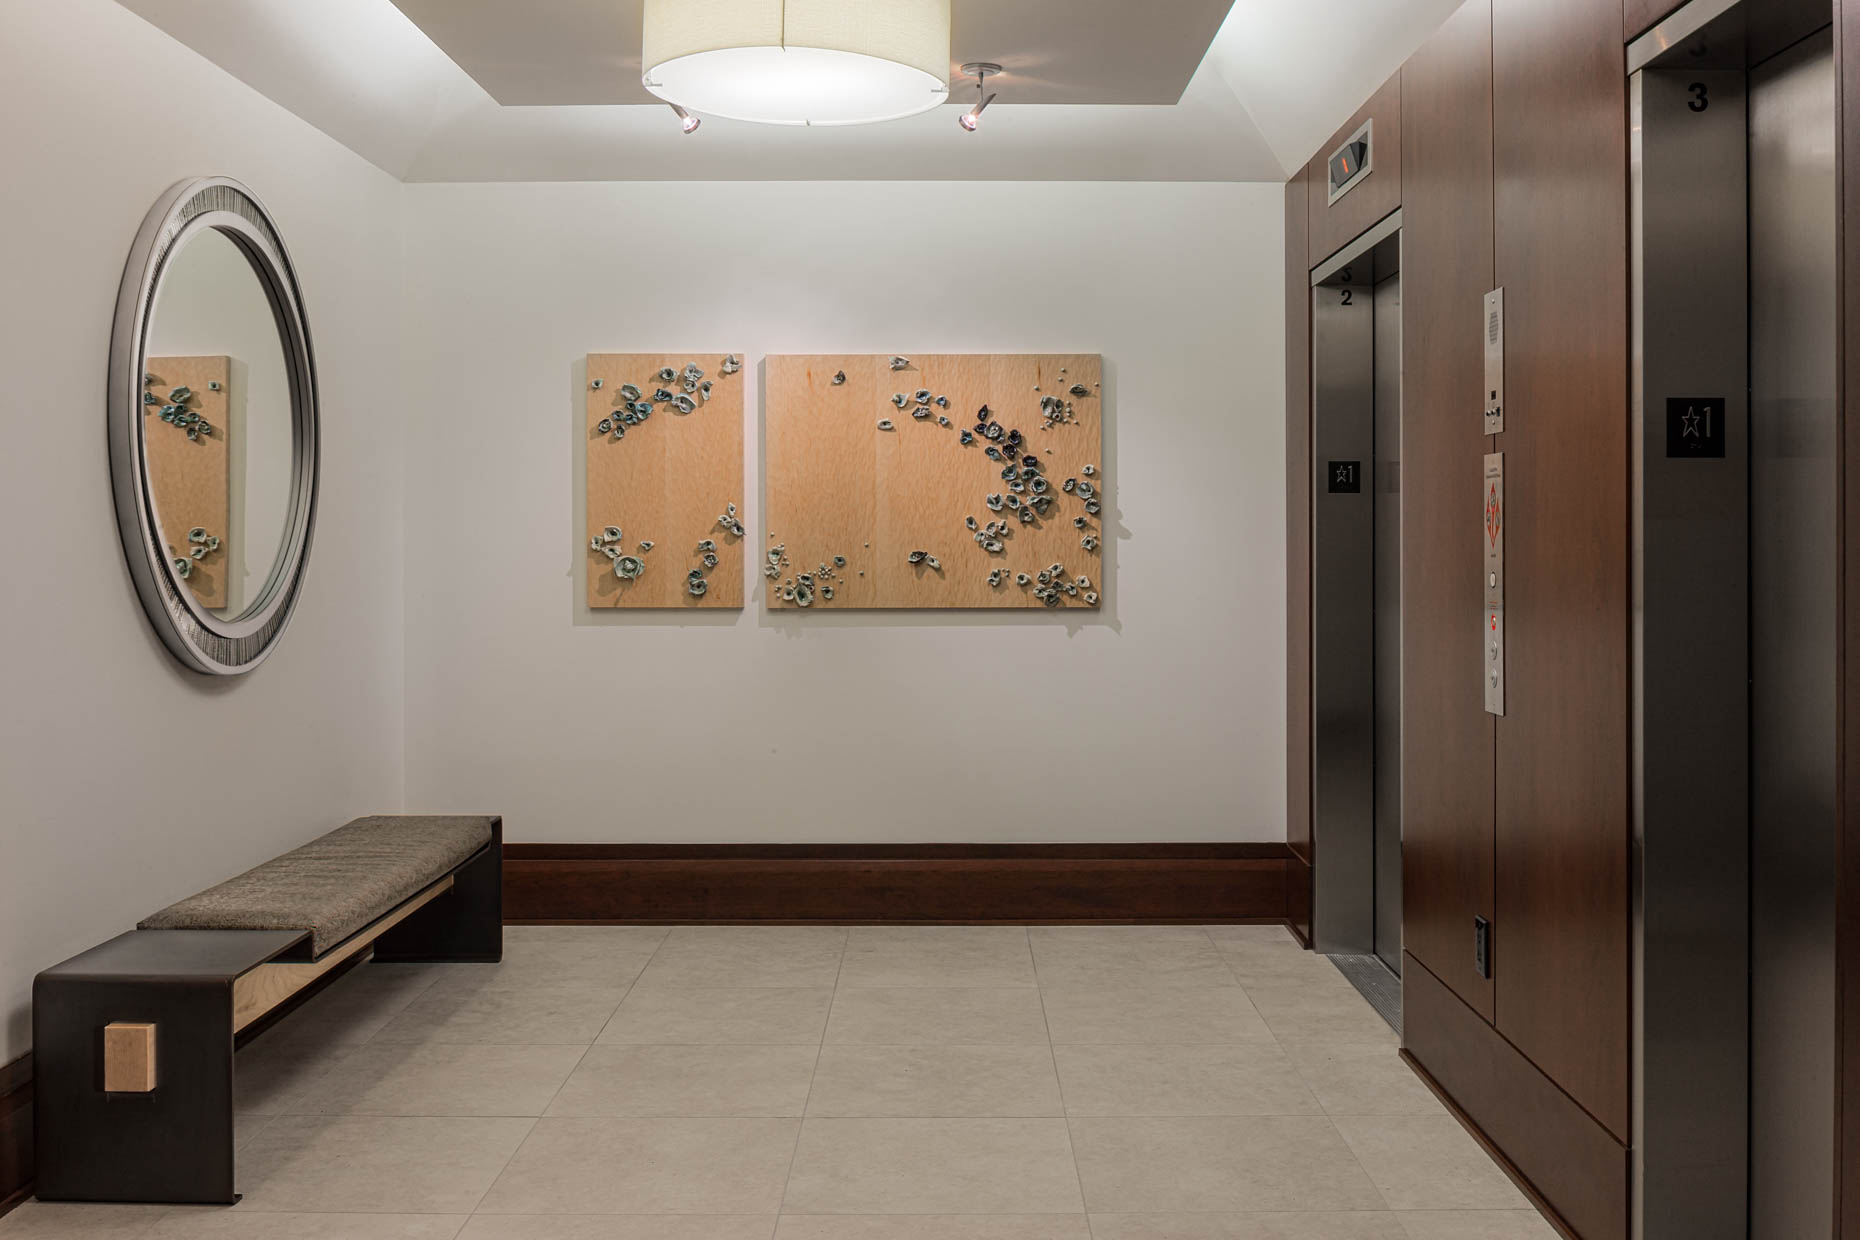 condo lobby showing bright white tile floor, up-lighting, a maple, steel and leather bench, oval steel and porcelain mosaic mirror and wood wall panels